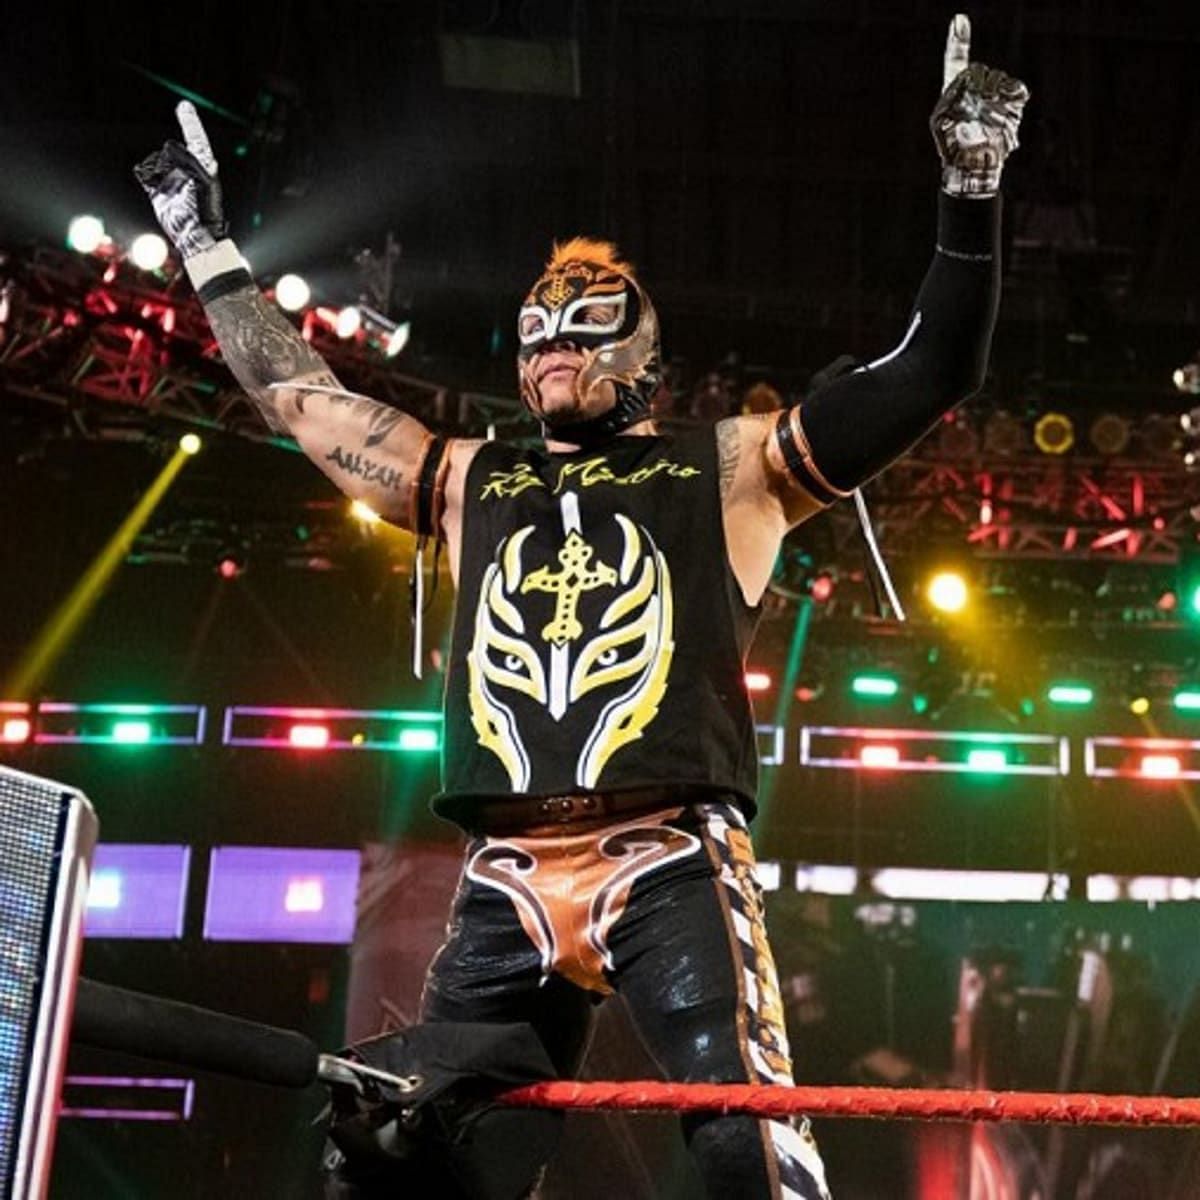 Rey Mysterio is a legend